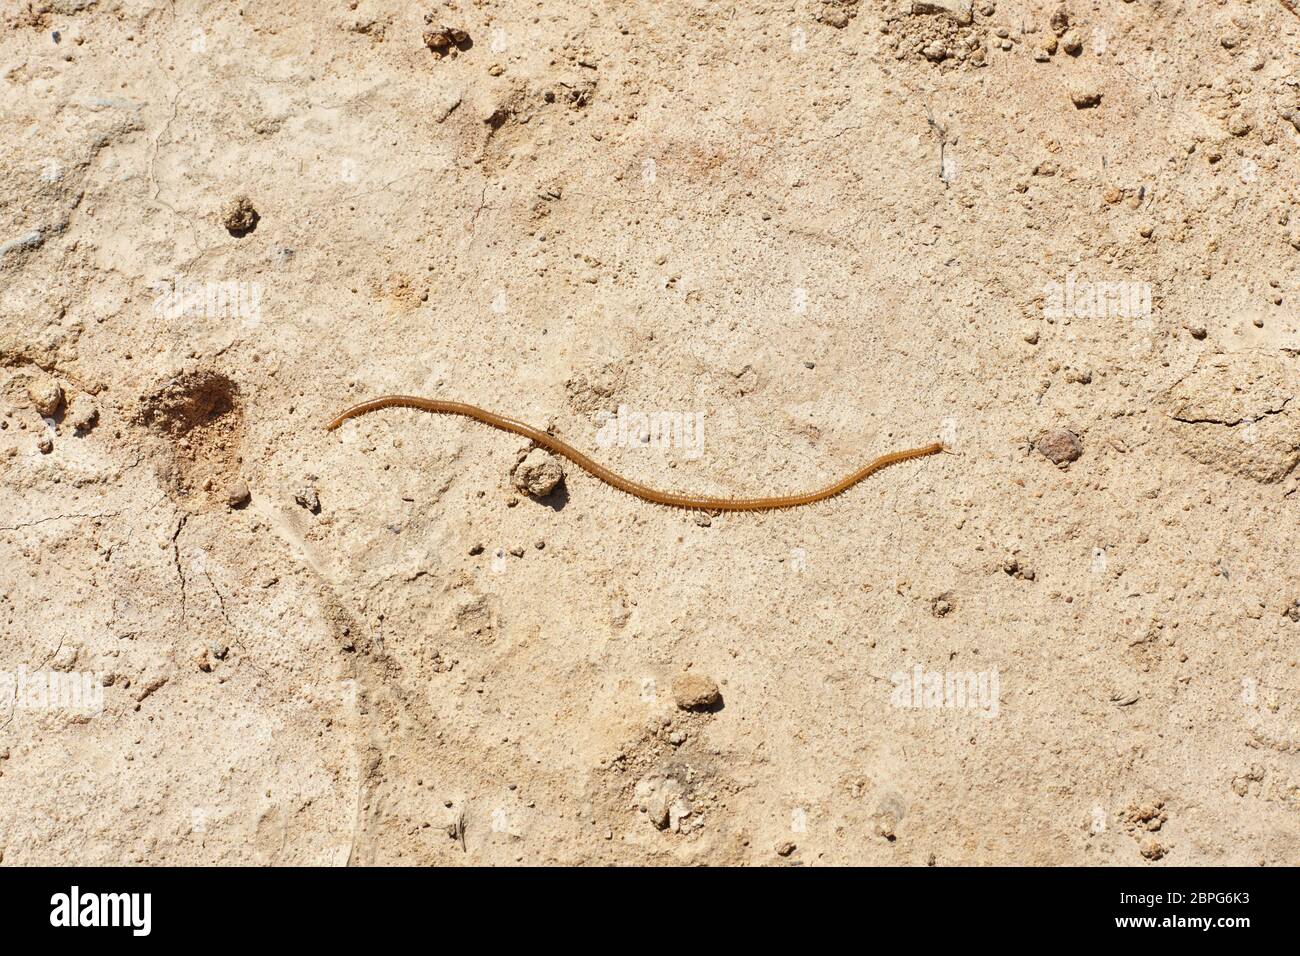 millepede insect on dry soil. Stock Photo